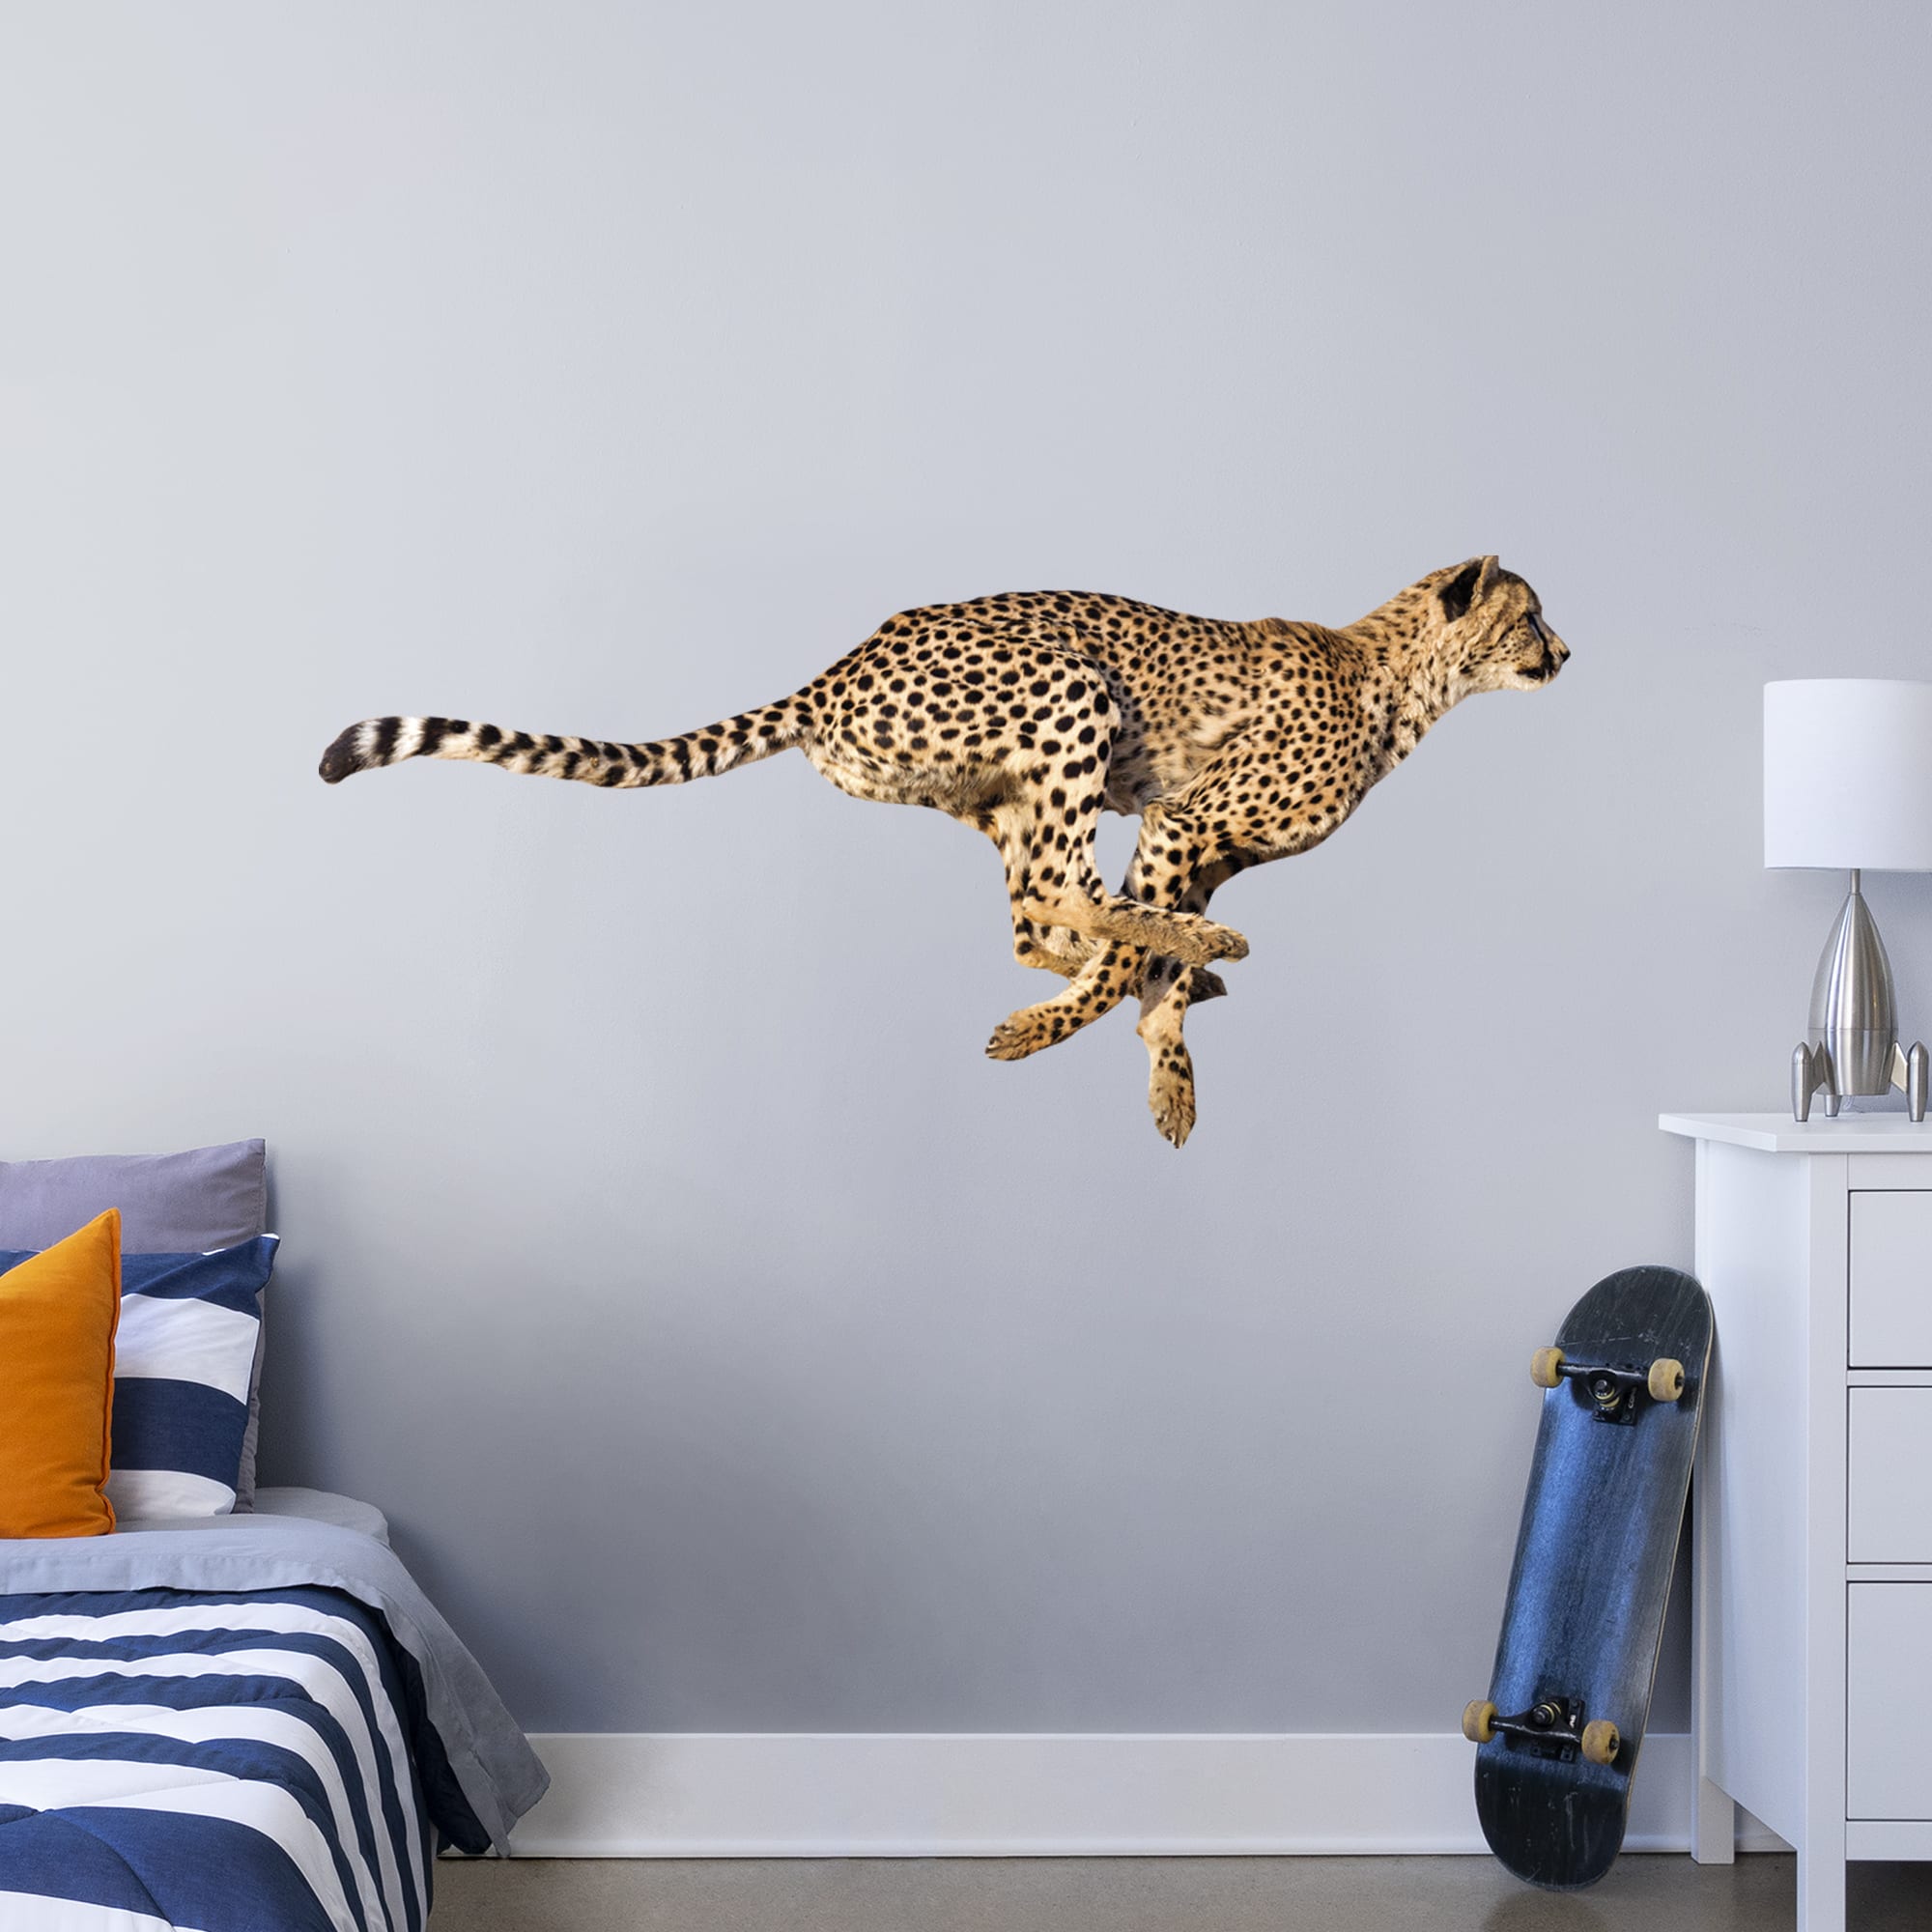 Cheetah - Removable Vinyl Decal Giant Animal + 2 Decals (62"W x 29"H) by Fathead